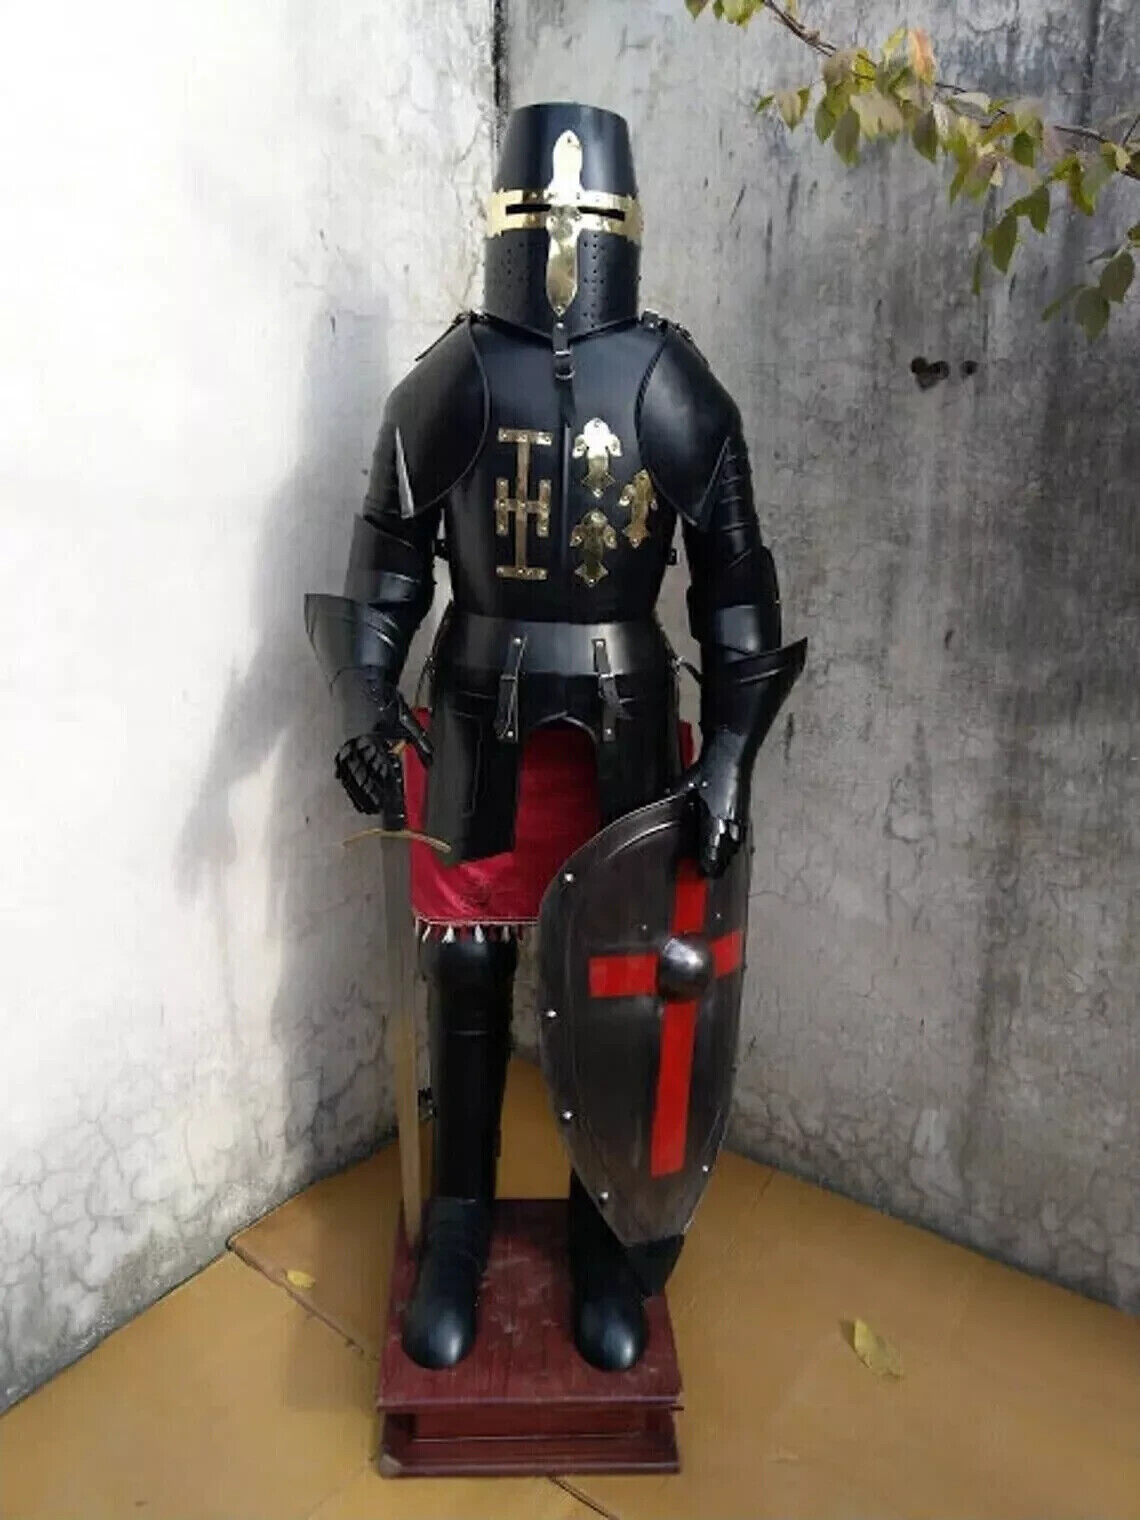 Medieval Wearable Templar Antique Suit Of Armor Crusader Knight Full Body Armour